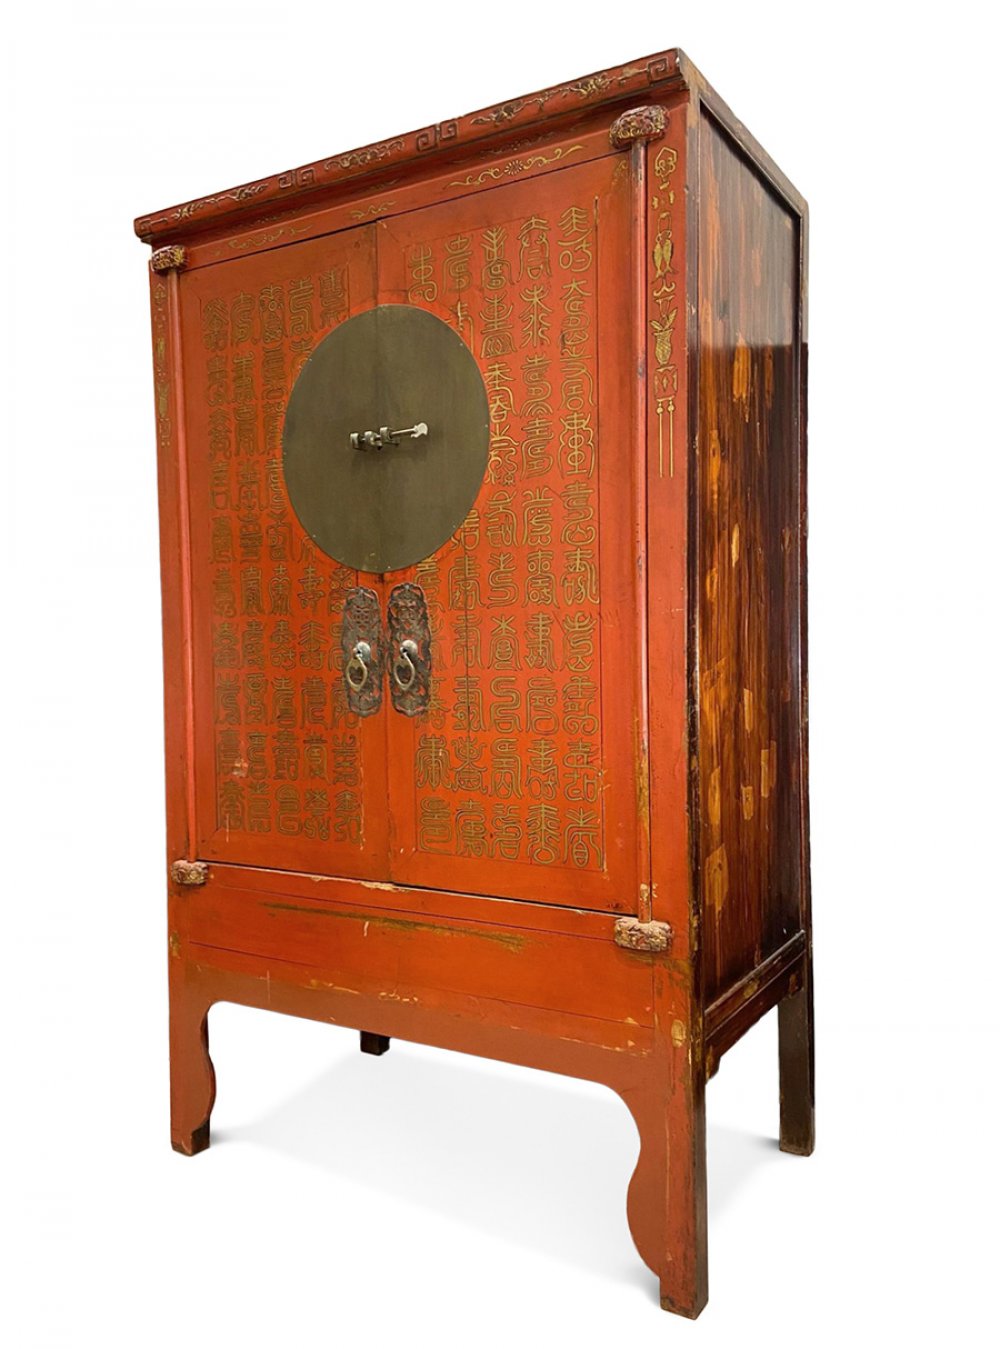 Cabinet. China, late 19th-early 20th century.Red lacquered elm wood with hand-decorated gold dust.